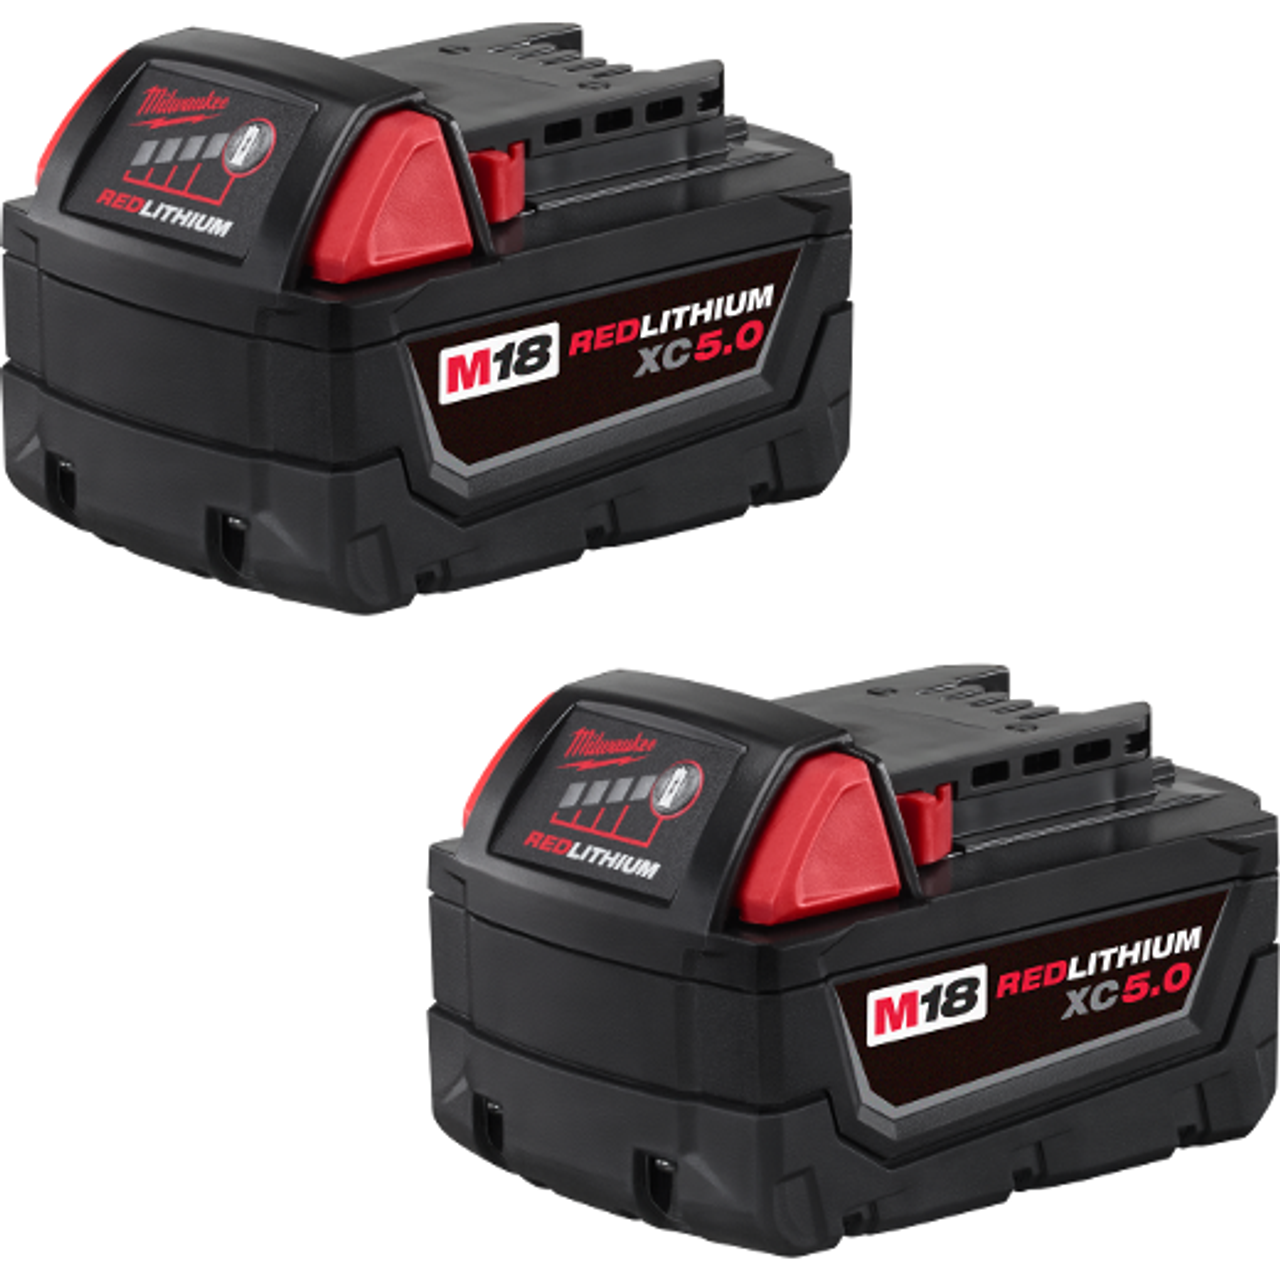 M18 REDLITHIUM XC5.0 Extended Capacity Battery Two Pack